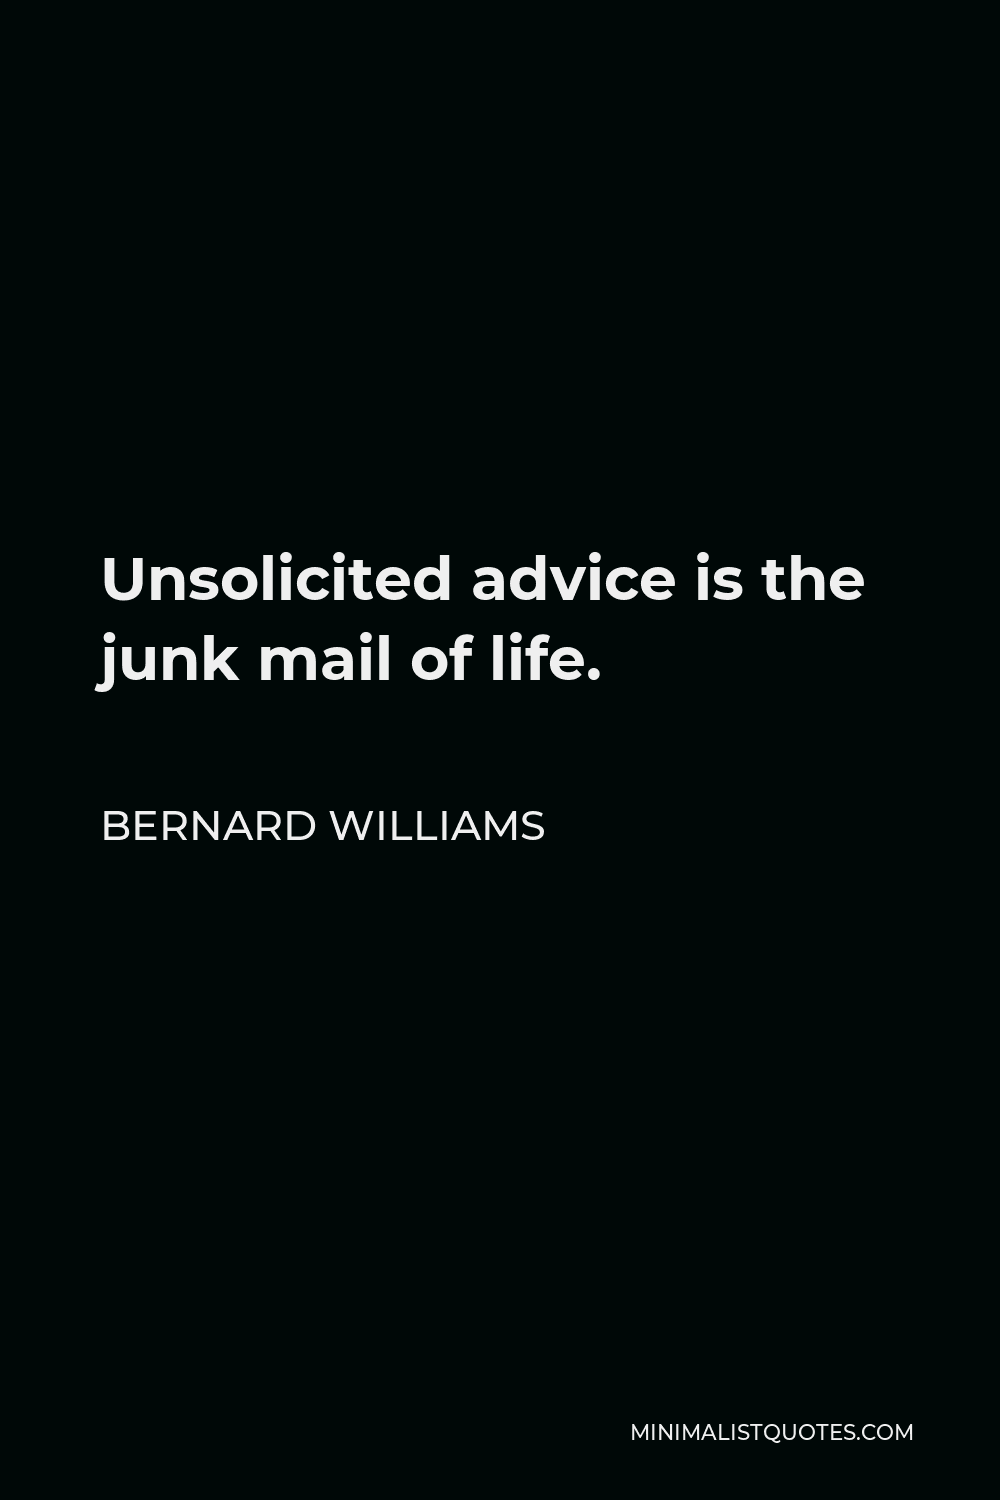 Bernard Williams Quote - Unsolicited advice is the junk mail of life.